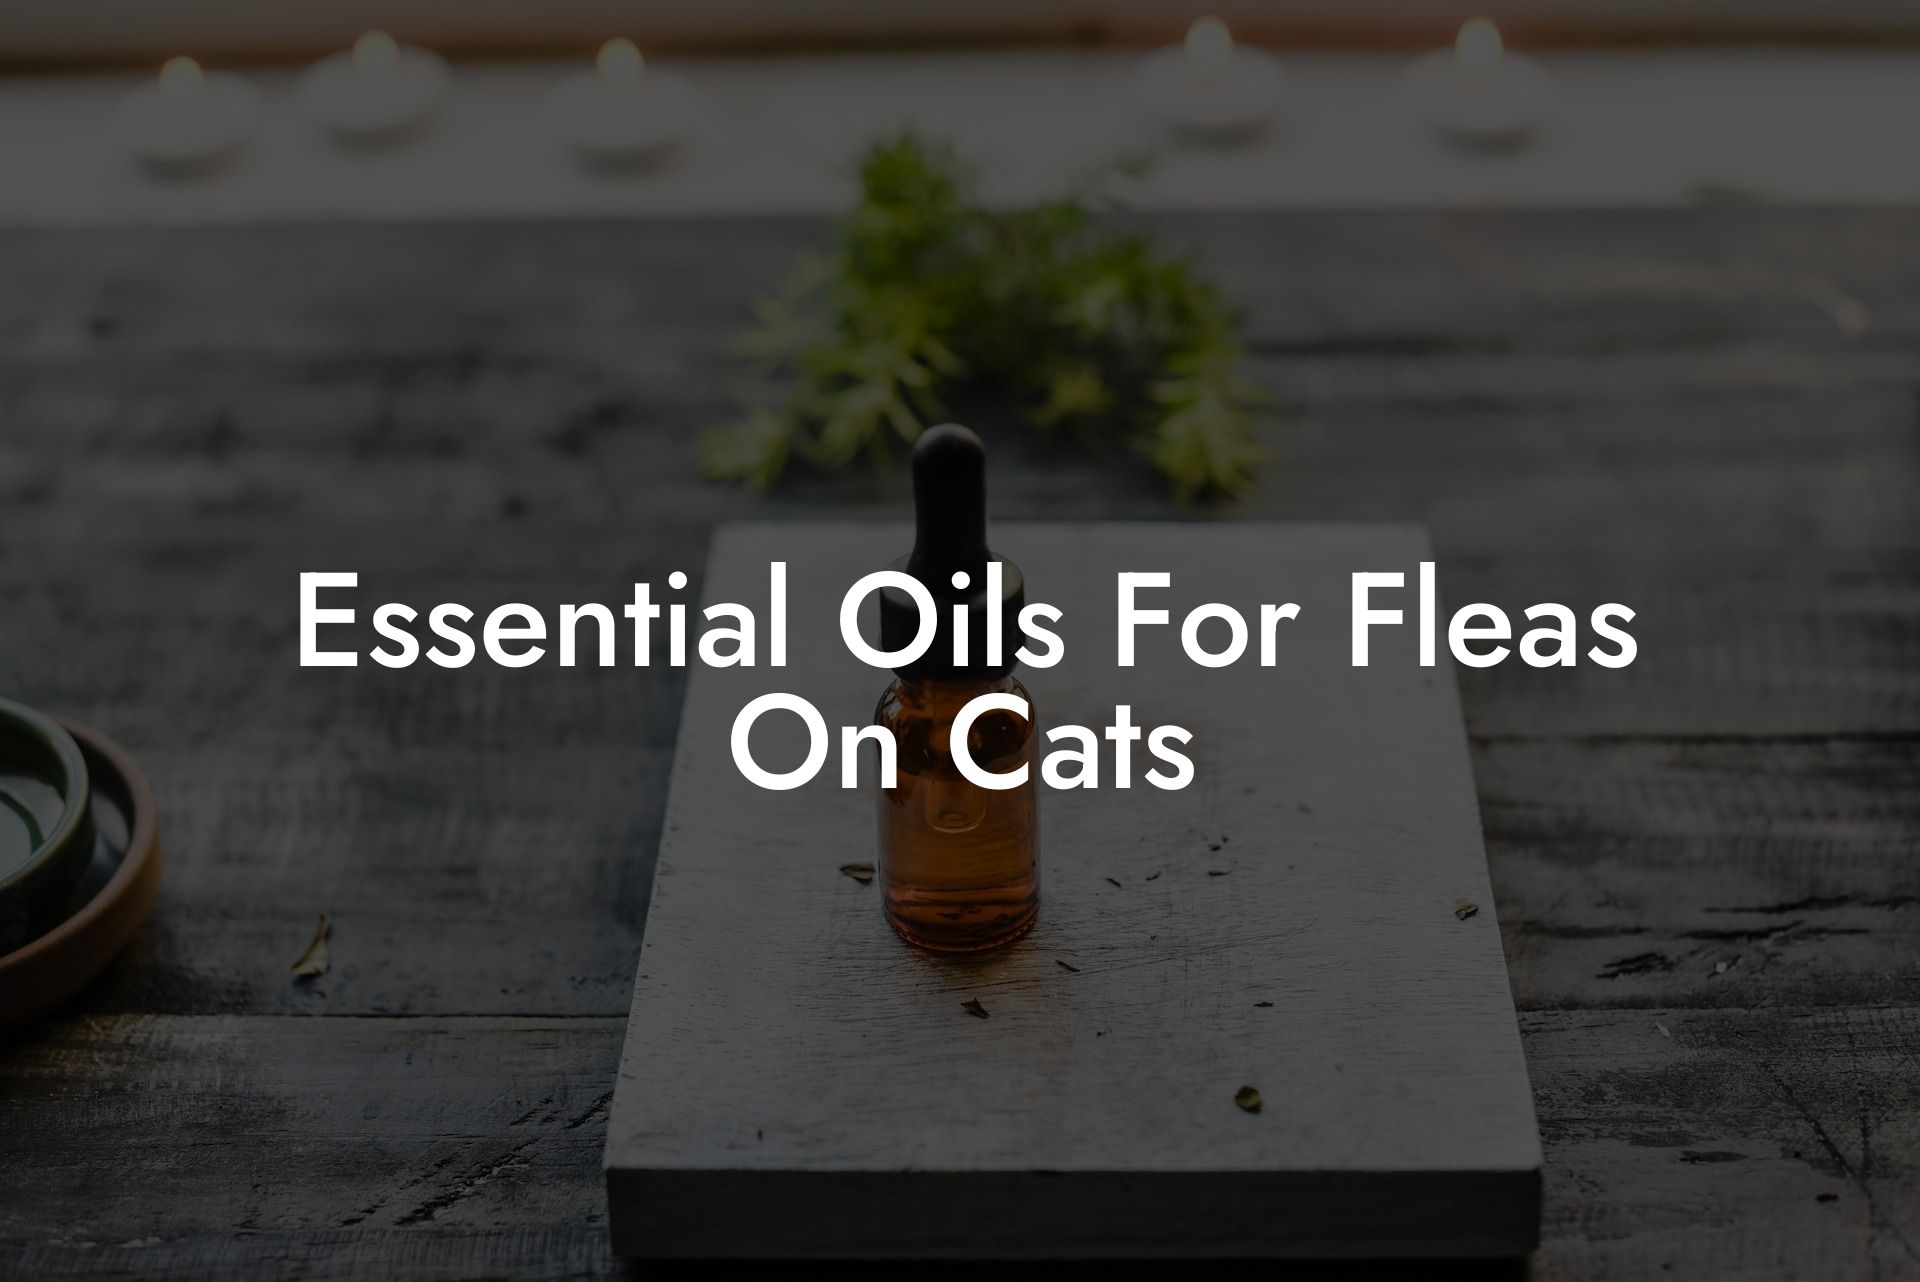 Essential Oils For Fleas On Cats